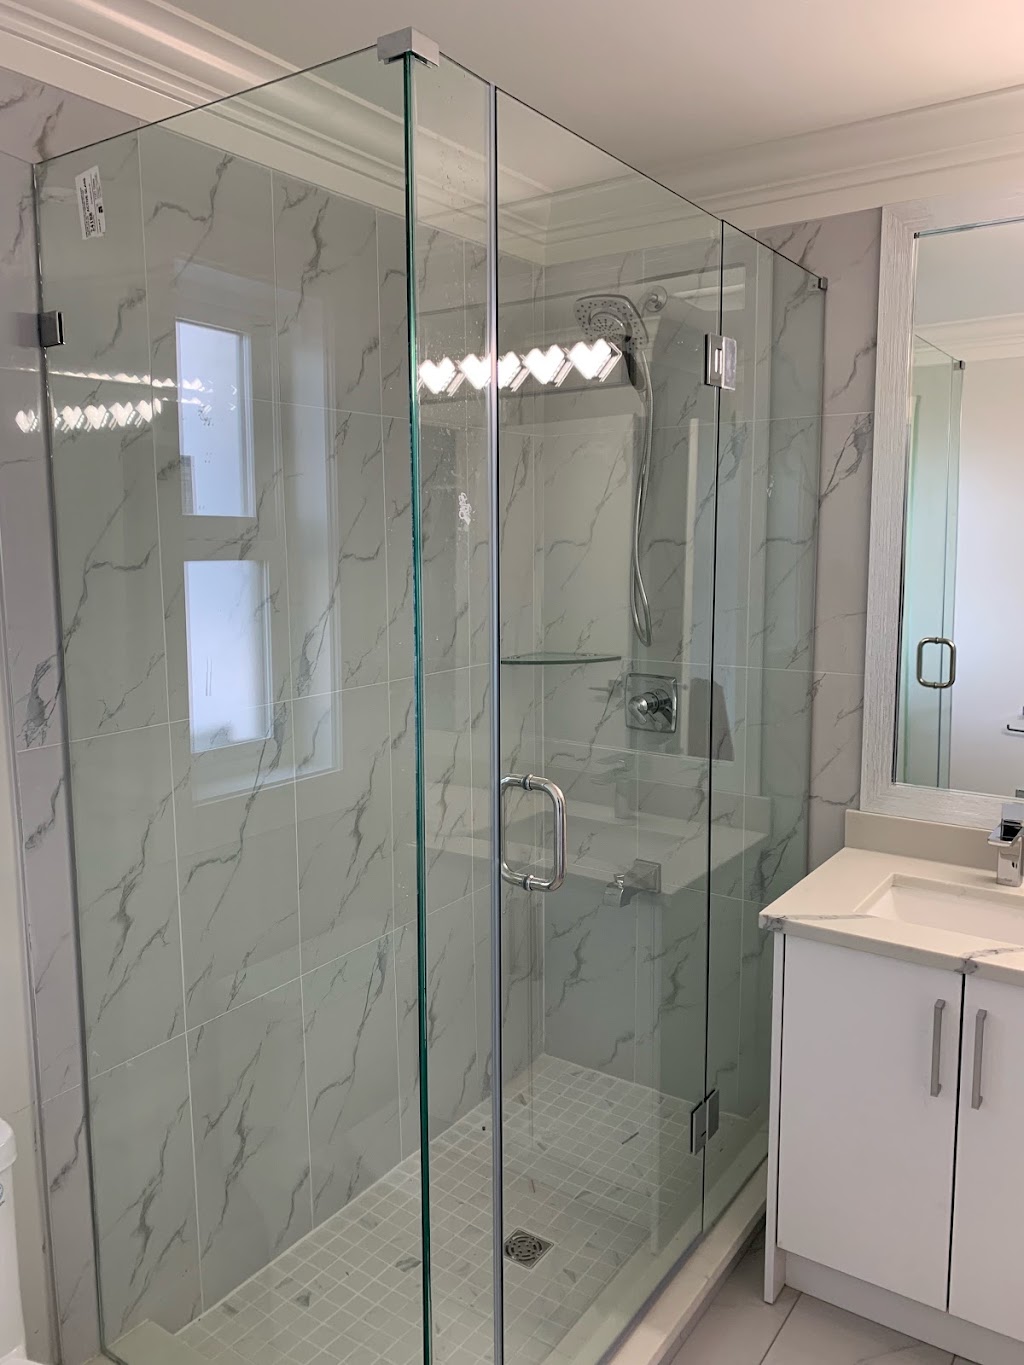 Active Glass & shower doors ltd | point of interest | 15299 68 Ave #122, Surrey, BC V3S 2C1, Canada | 7789292800 OR +1 778-929-2800